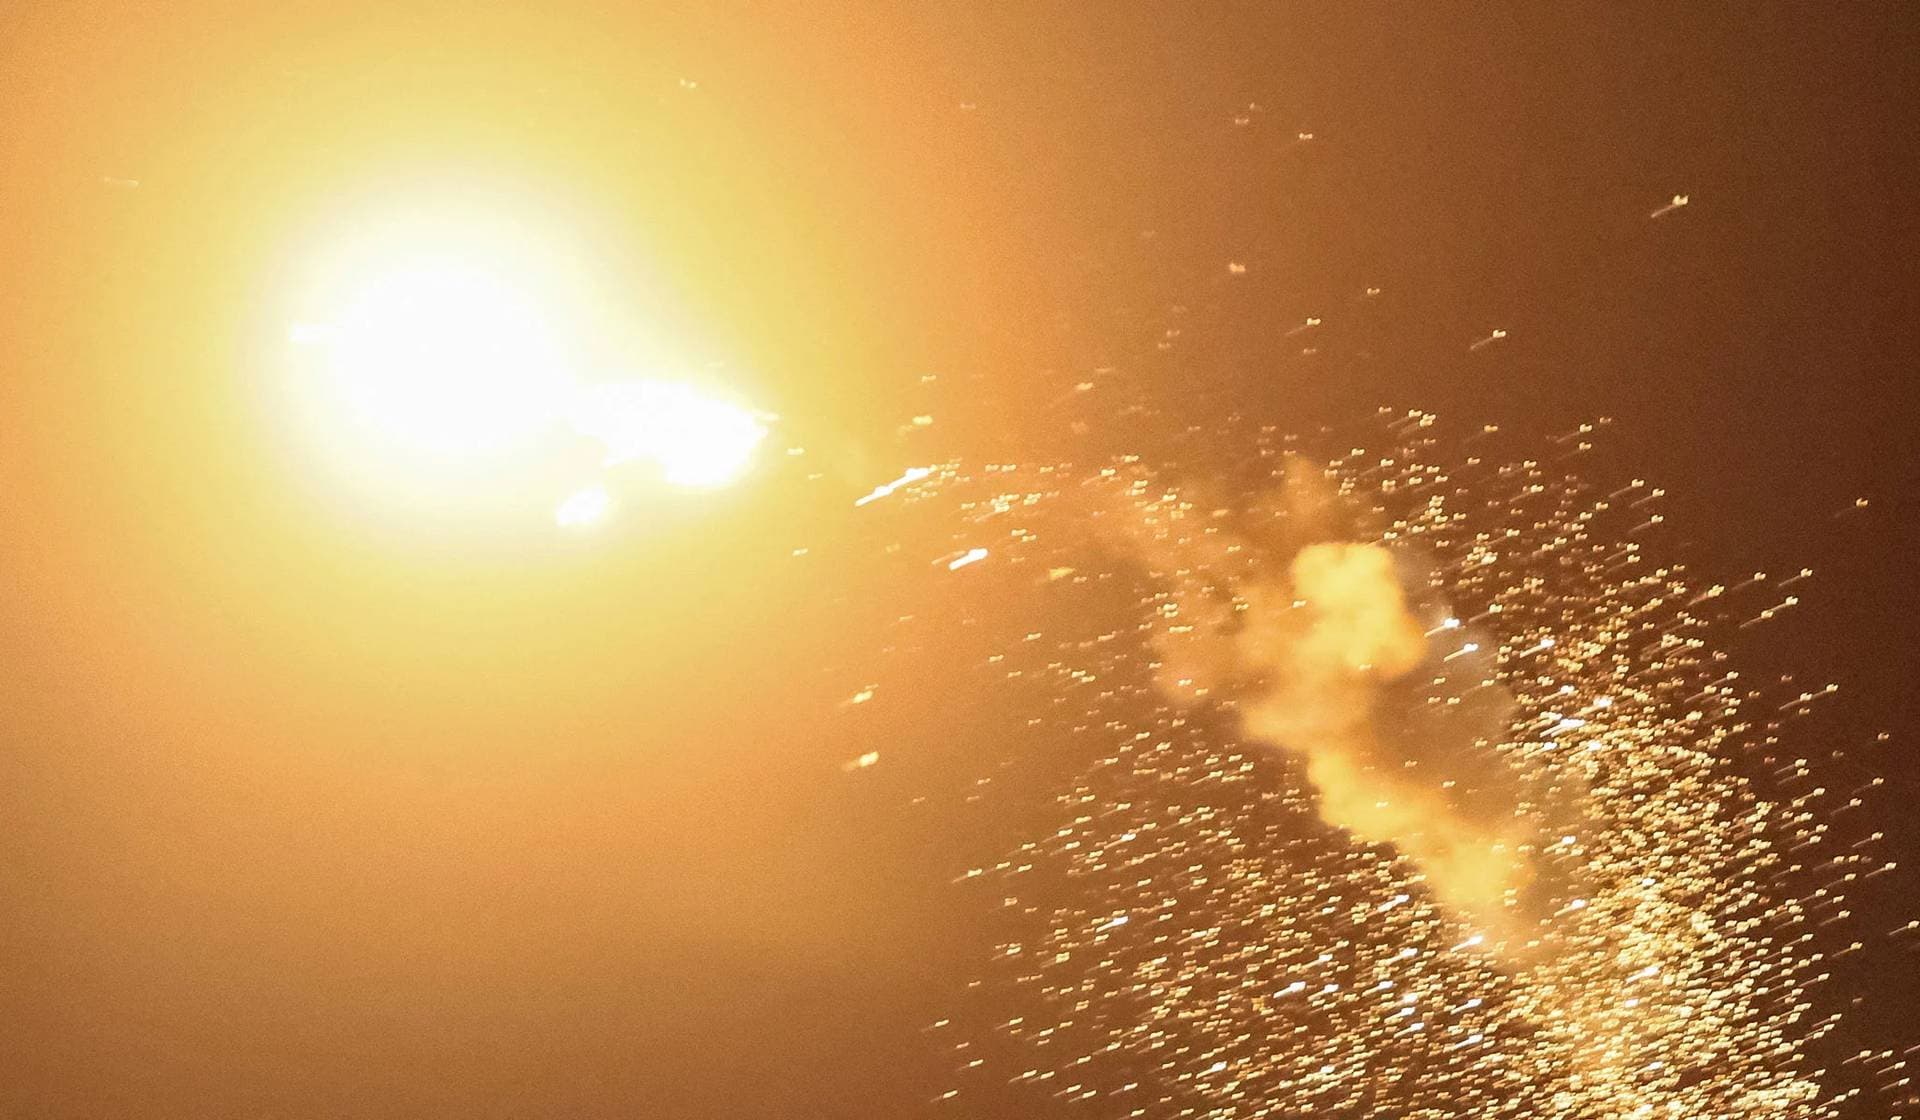 Explosion of a drone in the sky over the city during a Russian drone strike in Kyiv